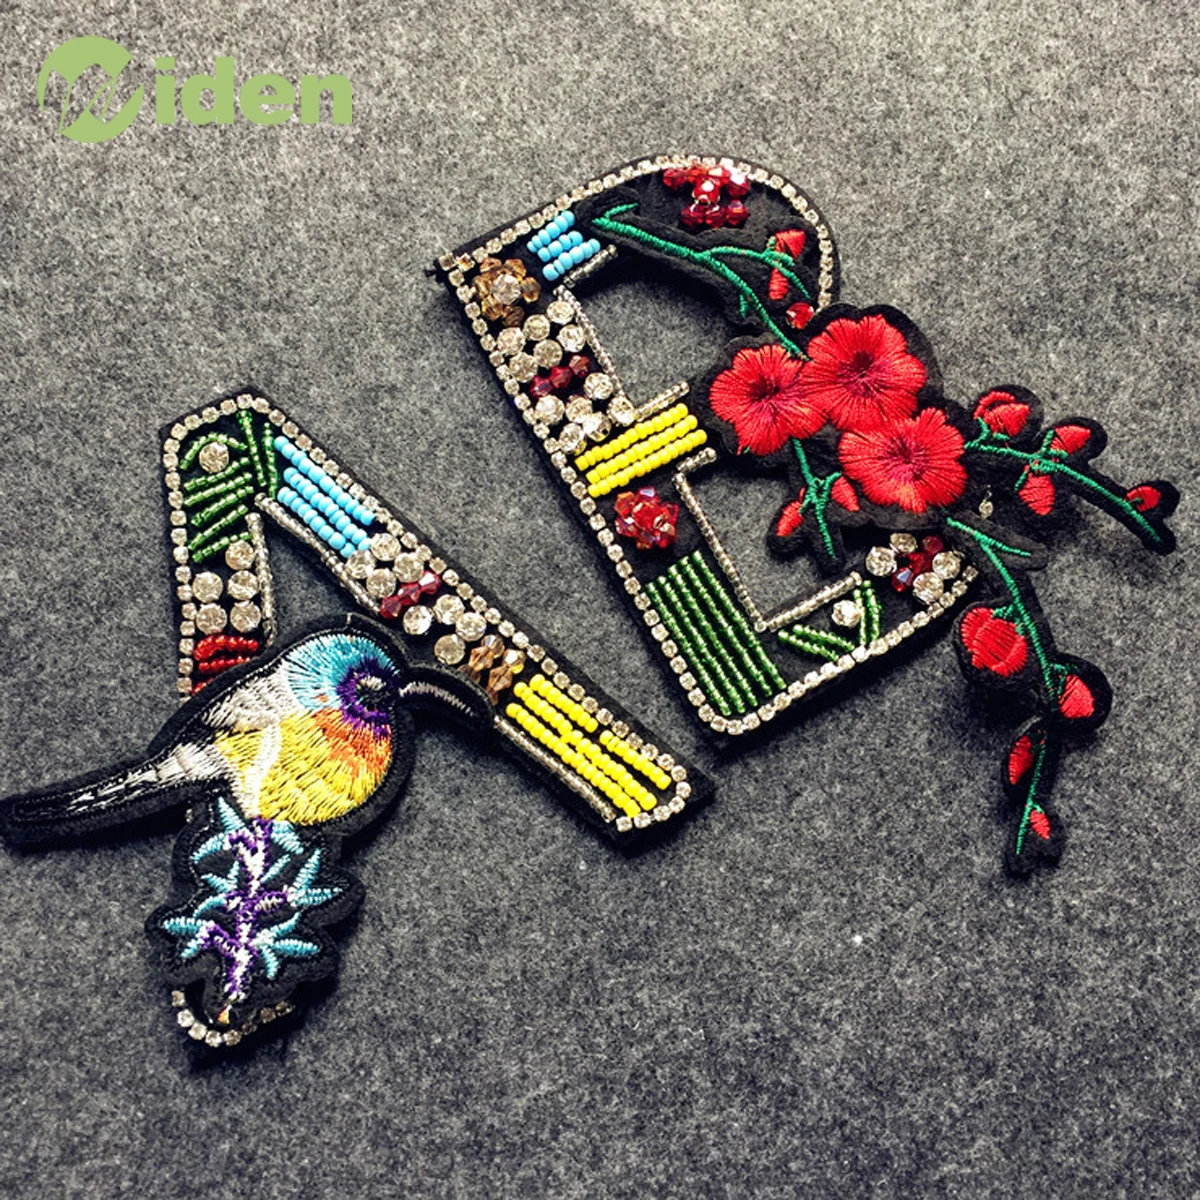 Wholesales Embroidered Beaded Stone Letters Brooches Applique